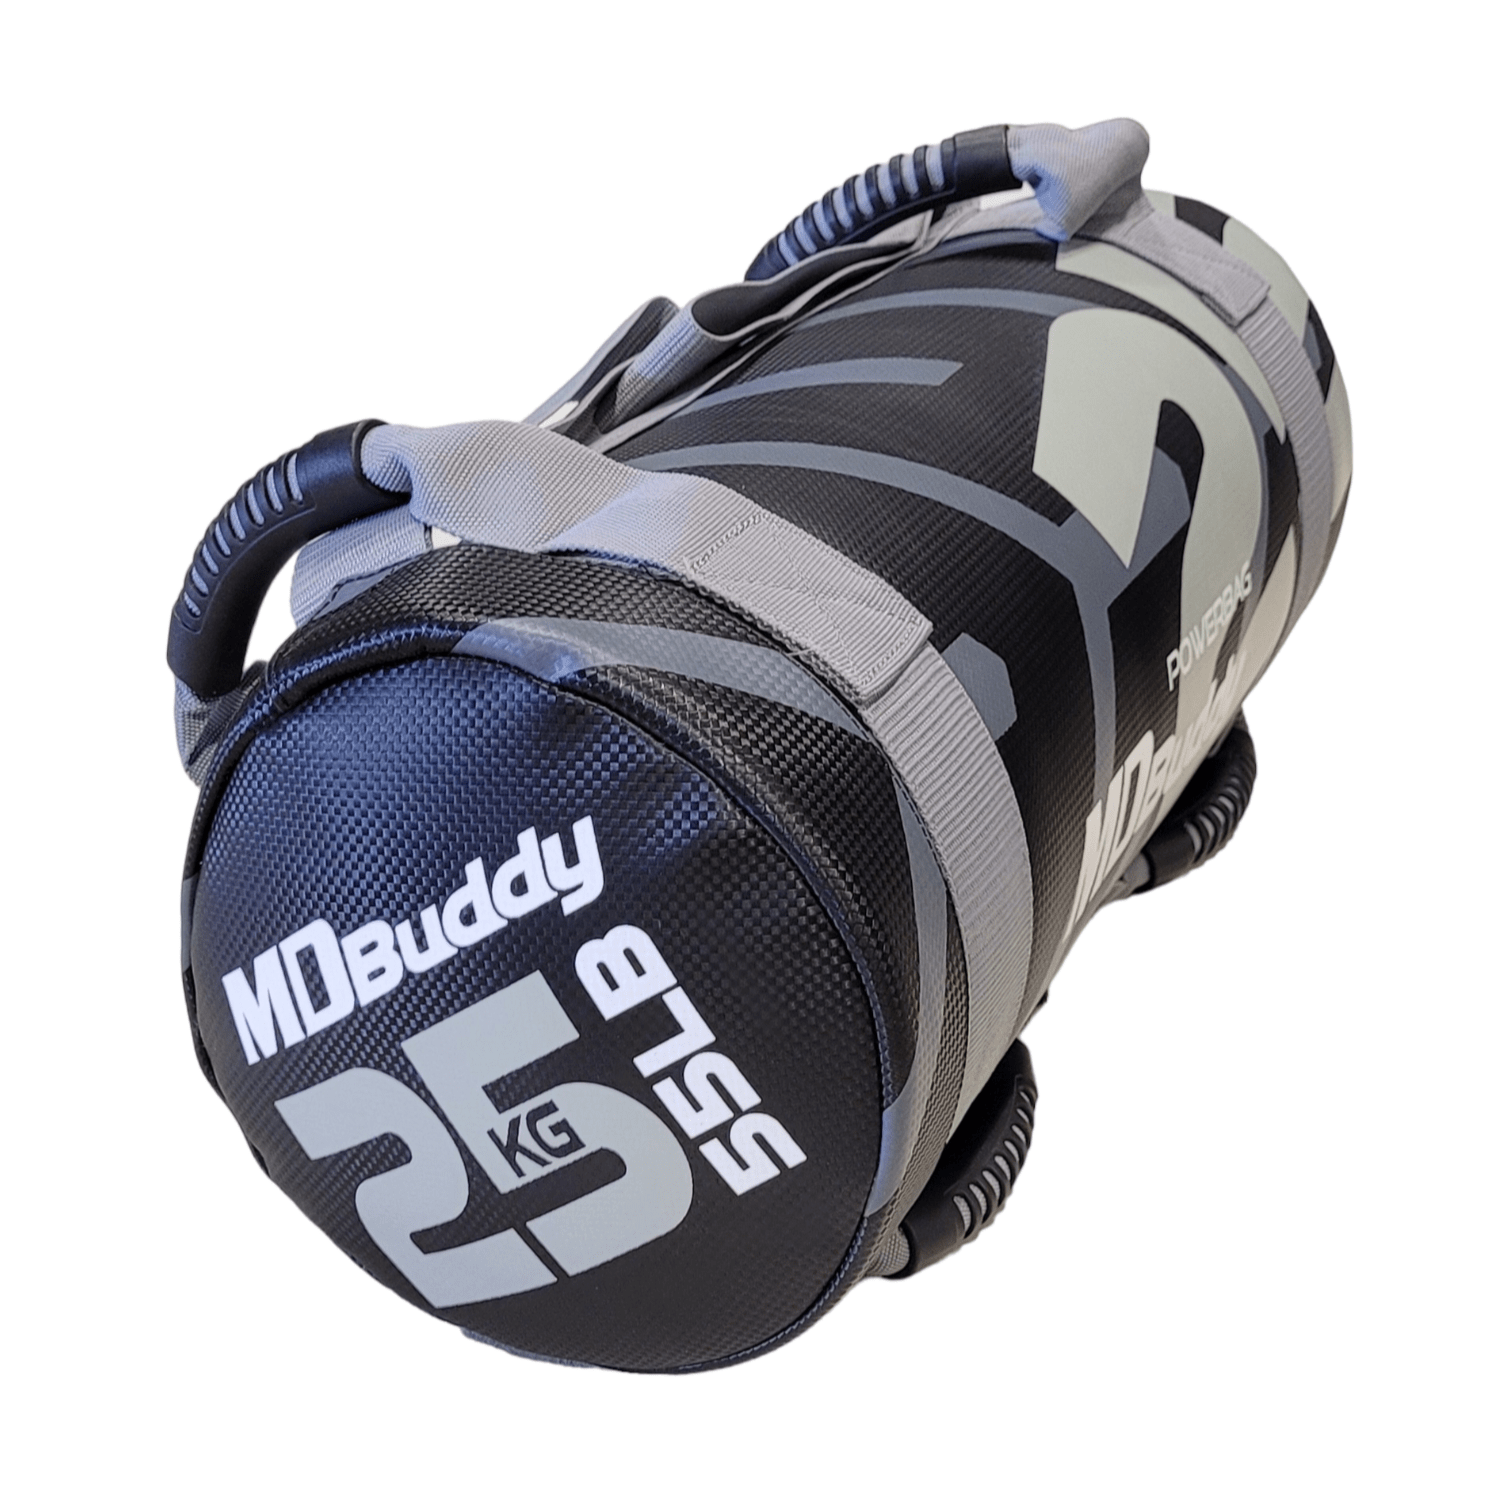 MD Buddy Weighted Training Bag-Weighted Training Bags-MD Buddy-5